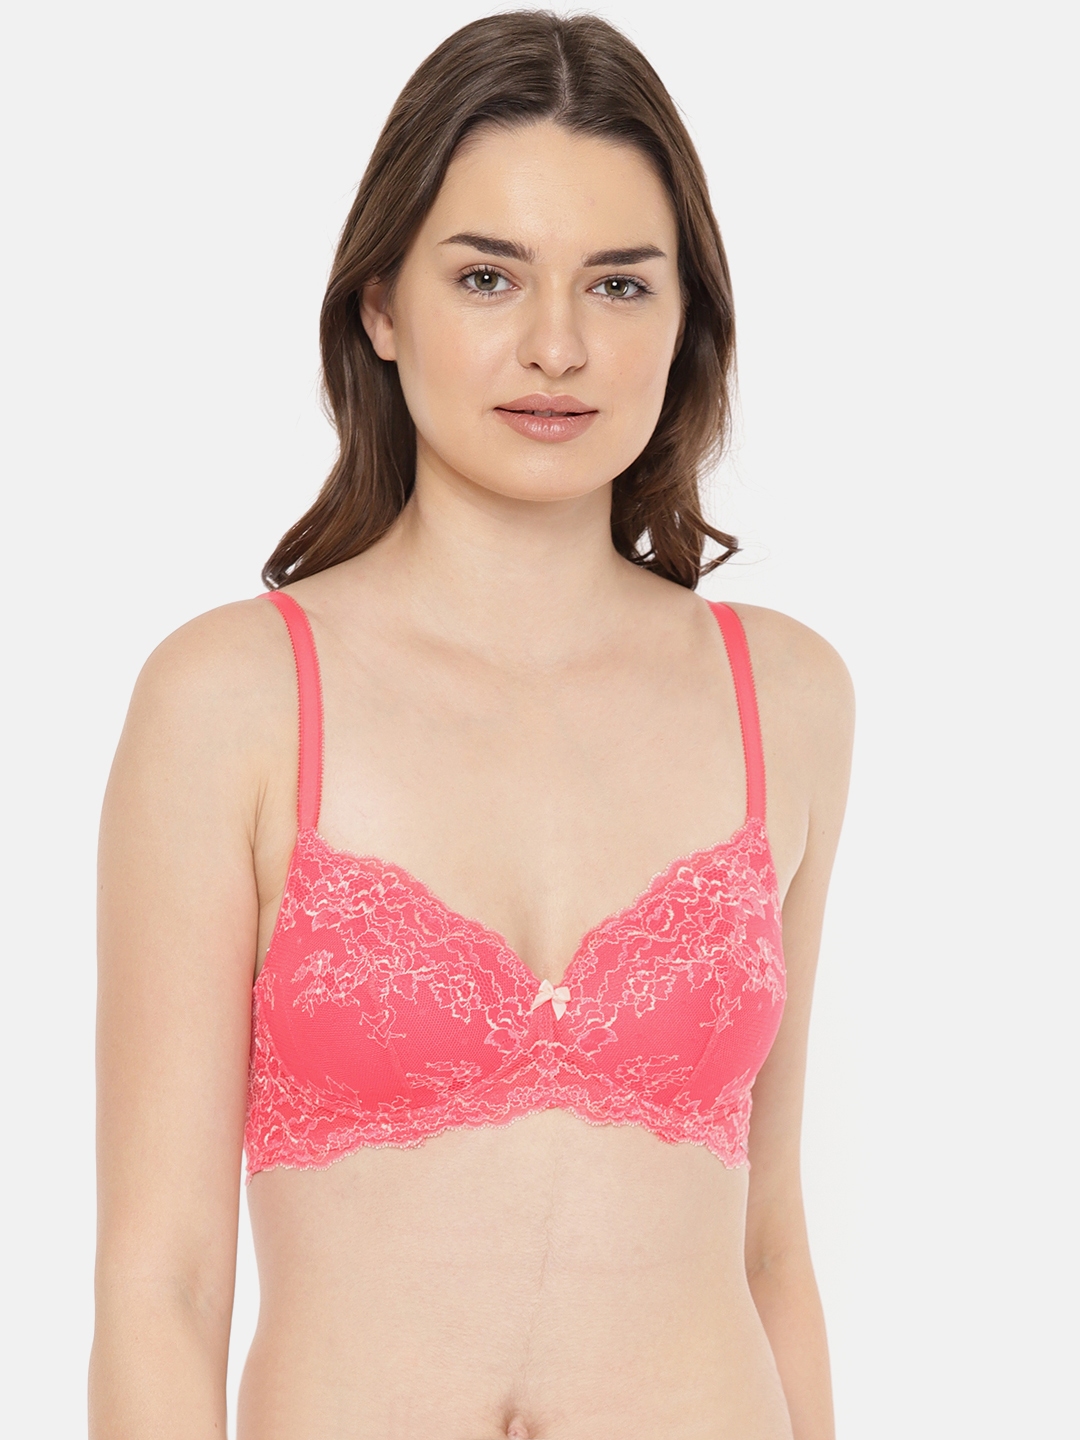 Buy Amante Solid Padded Wired Full Coverage Lace Bra at